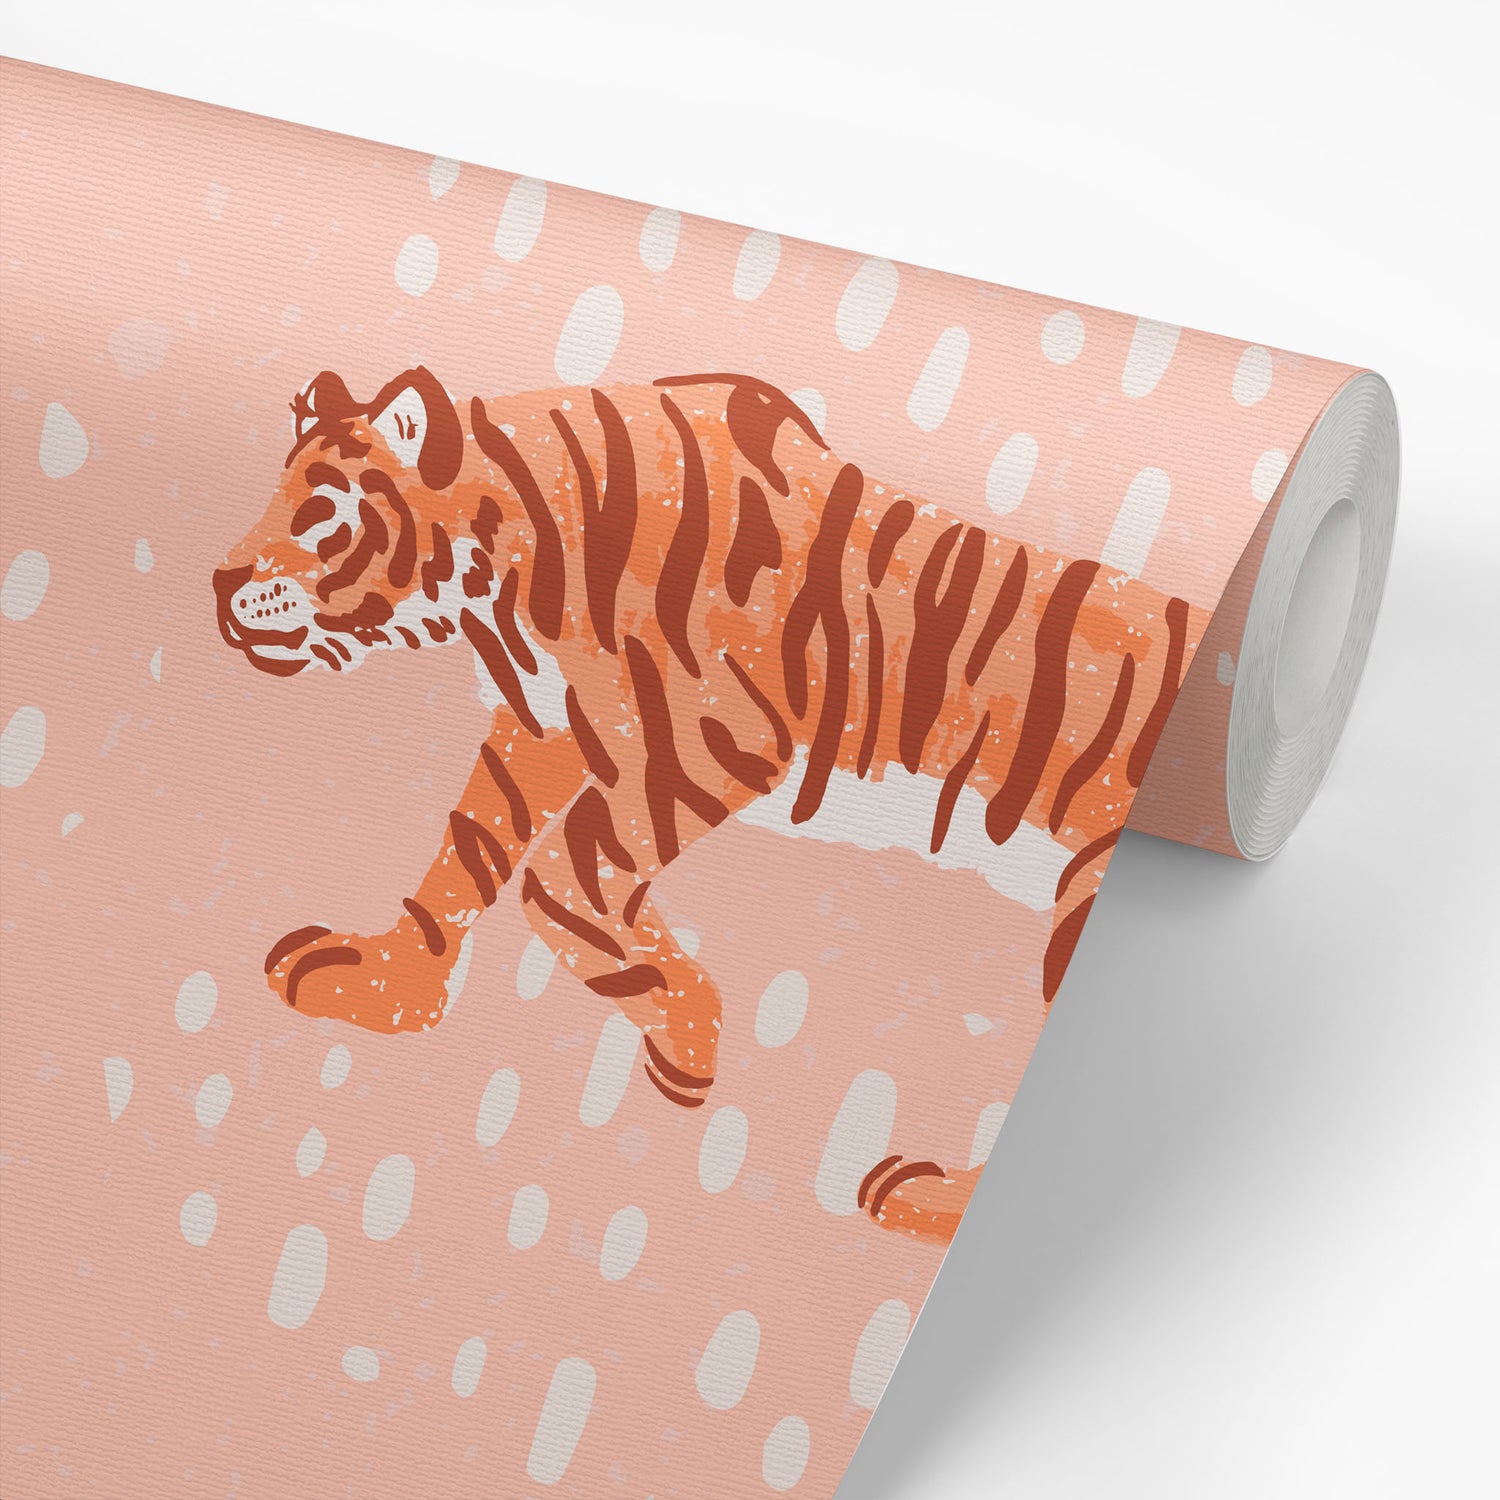 Wallpaper roll of Tiger Meadow- Pink Wallpaper perfect for a nursery or playroom space.